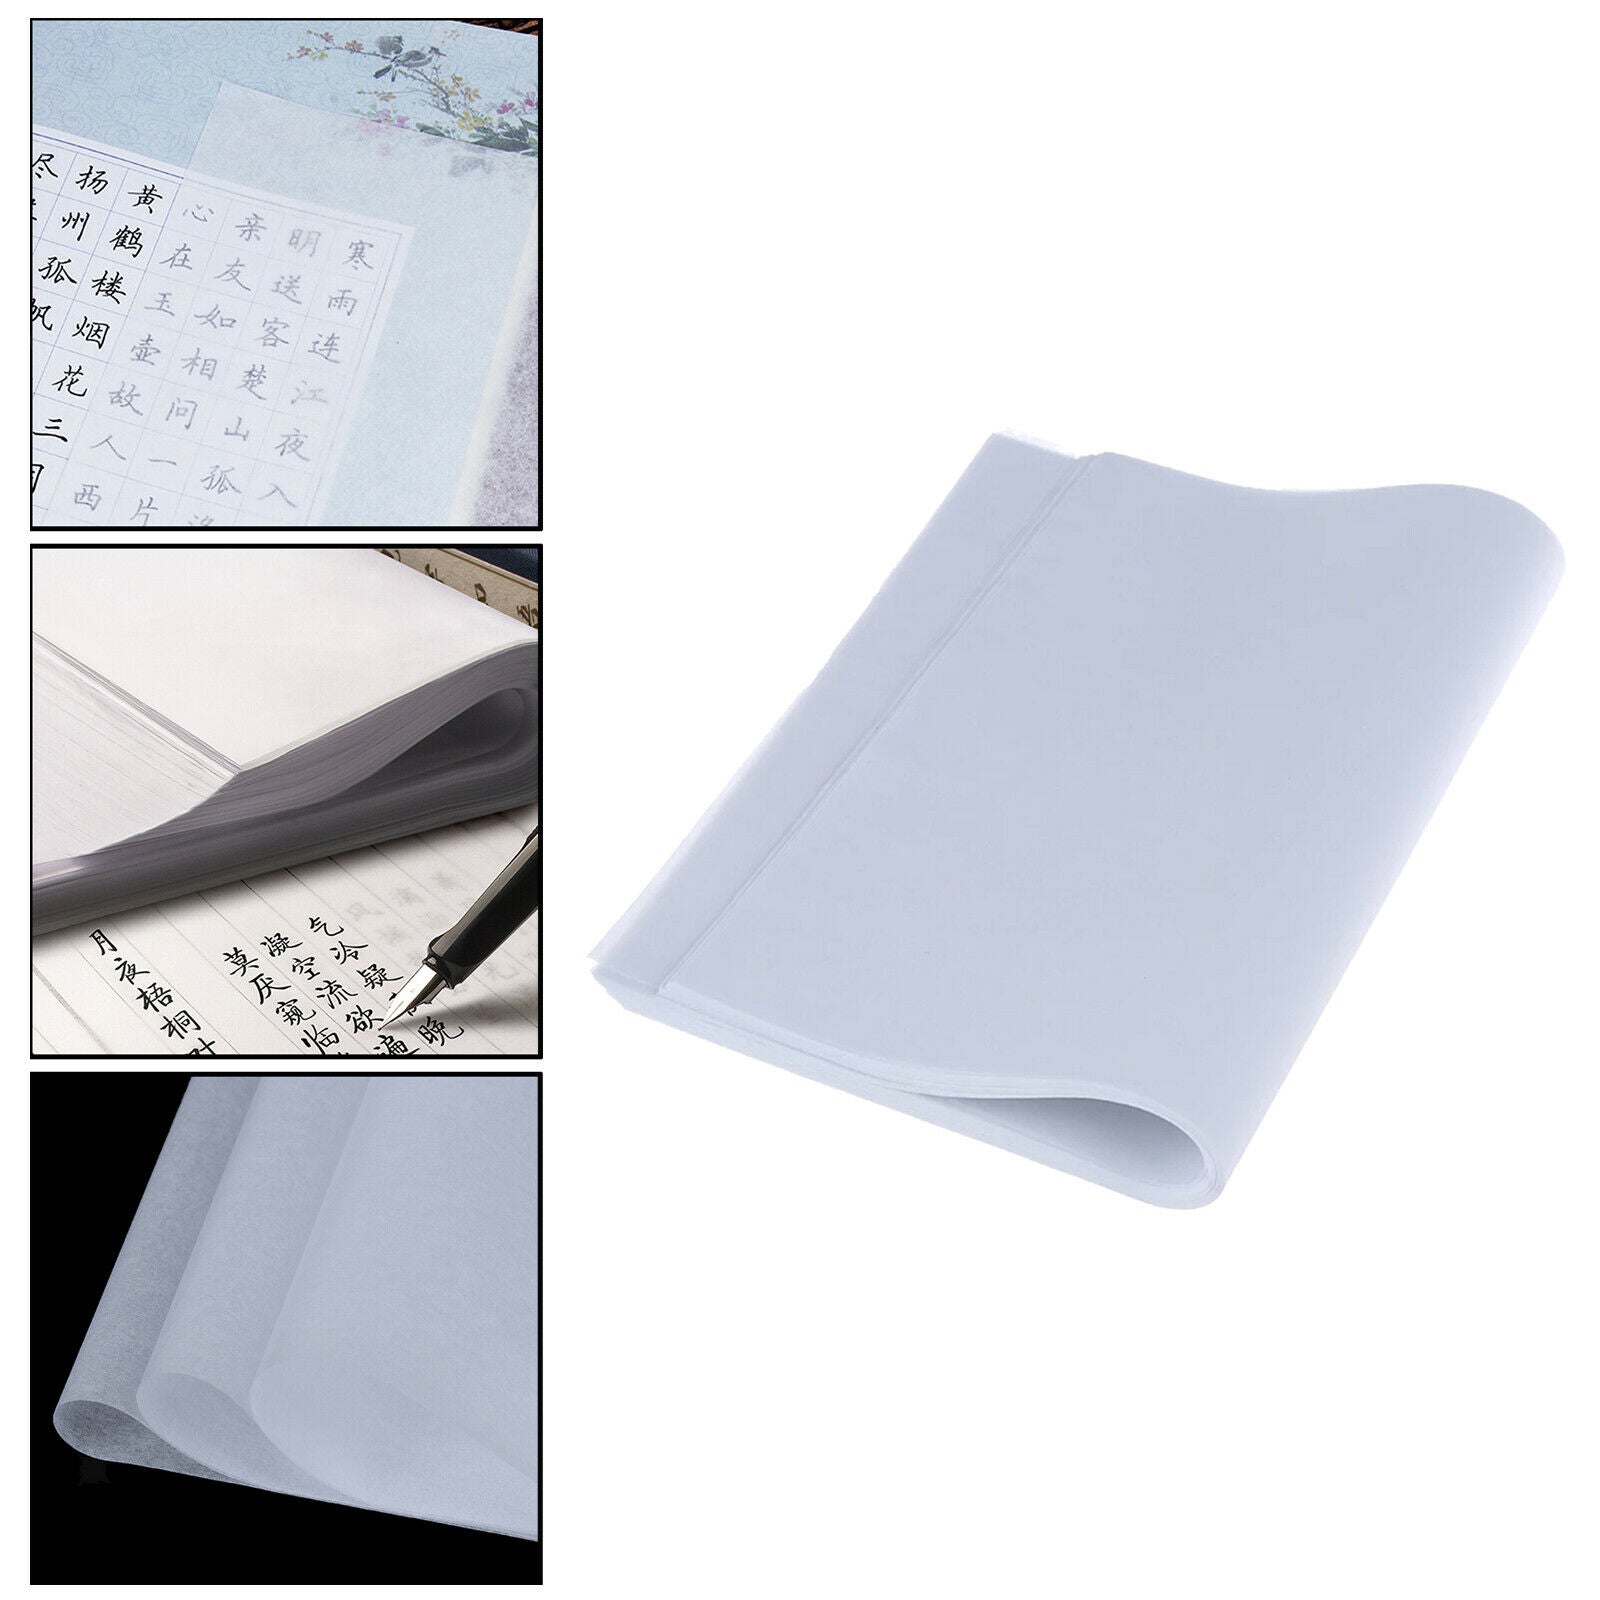 500x Tracing Paper A4 Artist Sketching Tracing Printing Paper Sheet Trace